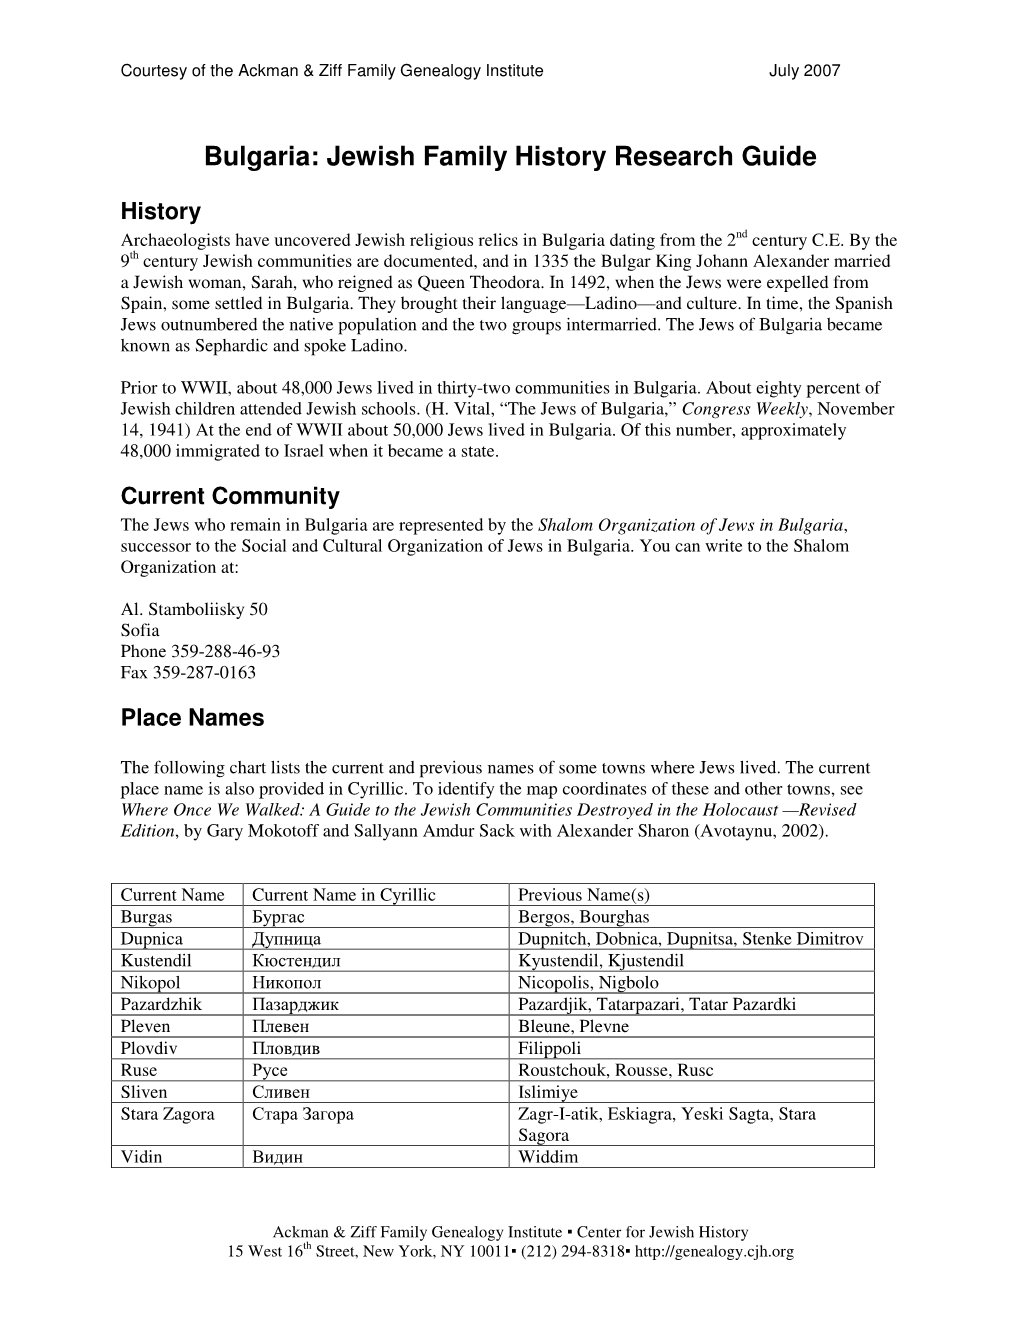 Bulgaria: Jewish Family History Research Guide